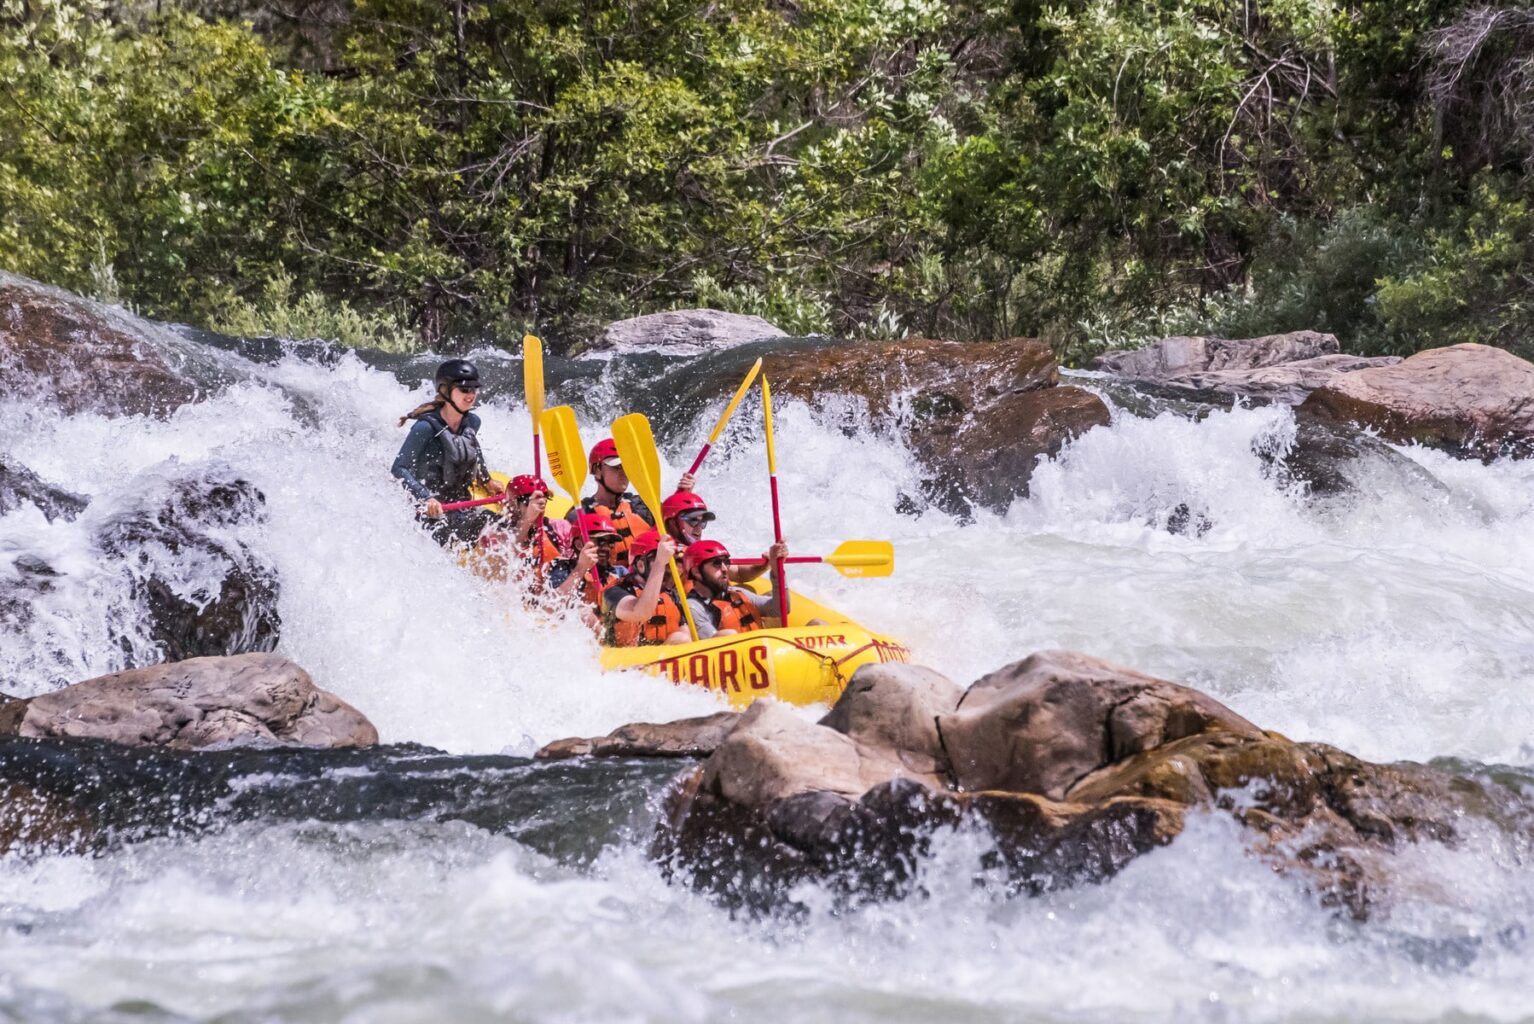 A group of people hold their paddles straight up in the air as they go down a rapid on the Tuolumne River in California